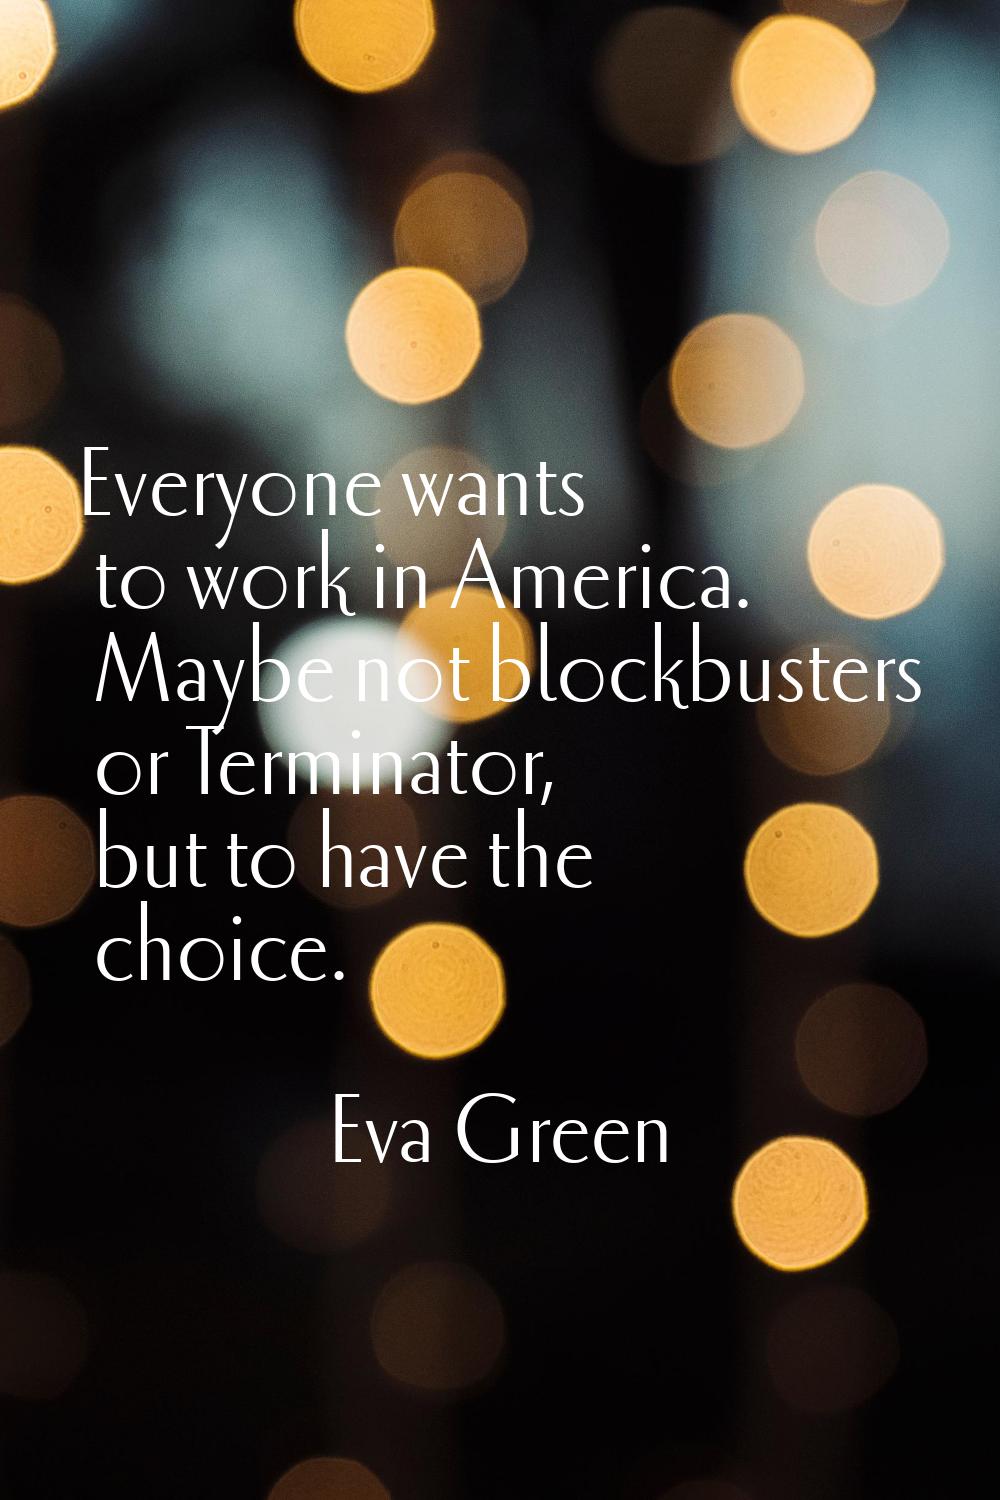 Everyone wants to work in America. Maybe not blockbusters or Terminator, but to have the choice.